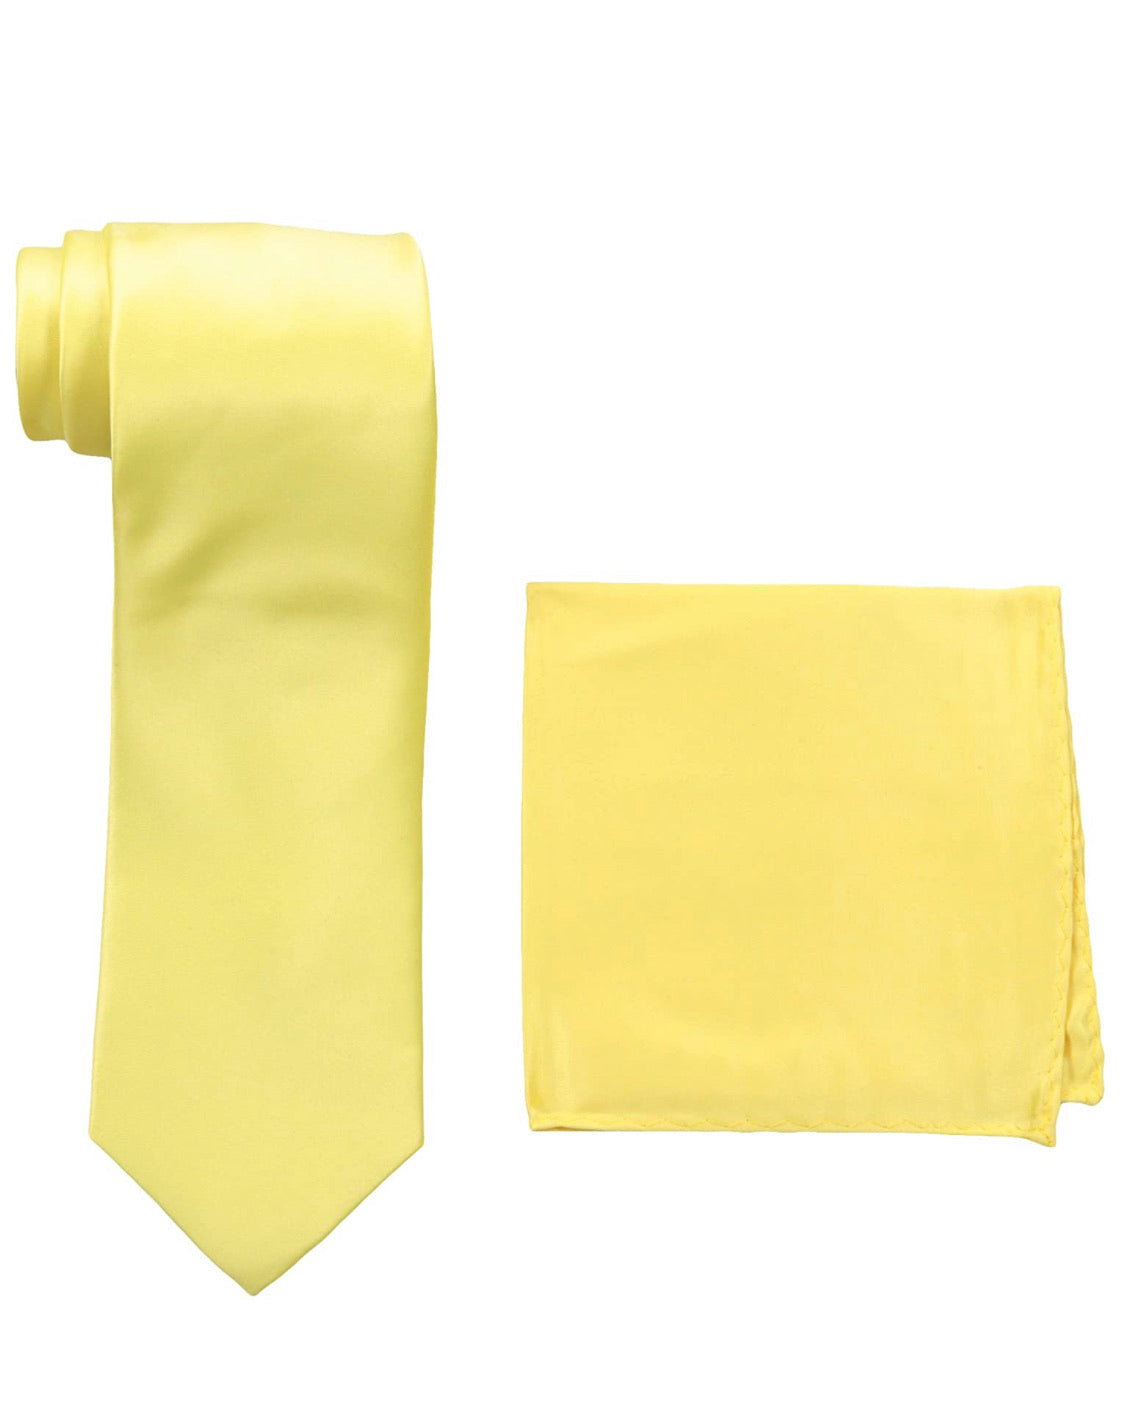 Stacy Adams Solid Banana Tie and Hanky - On Time Fashions Tuscaloosa